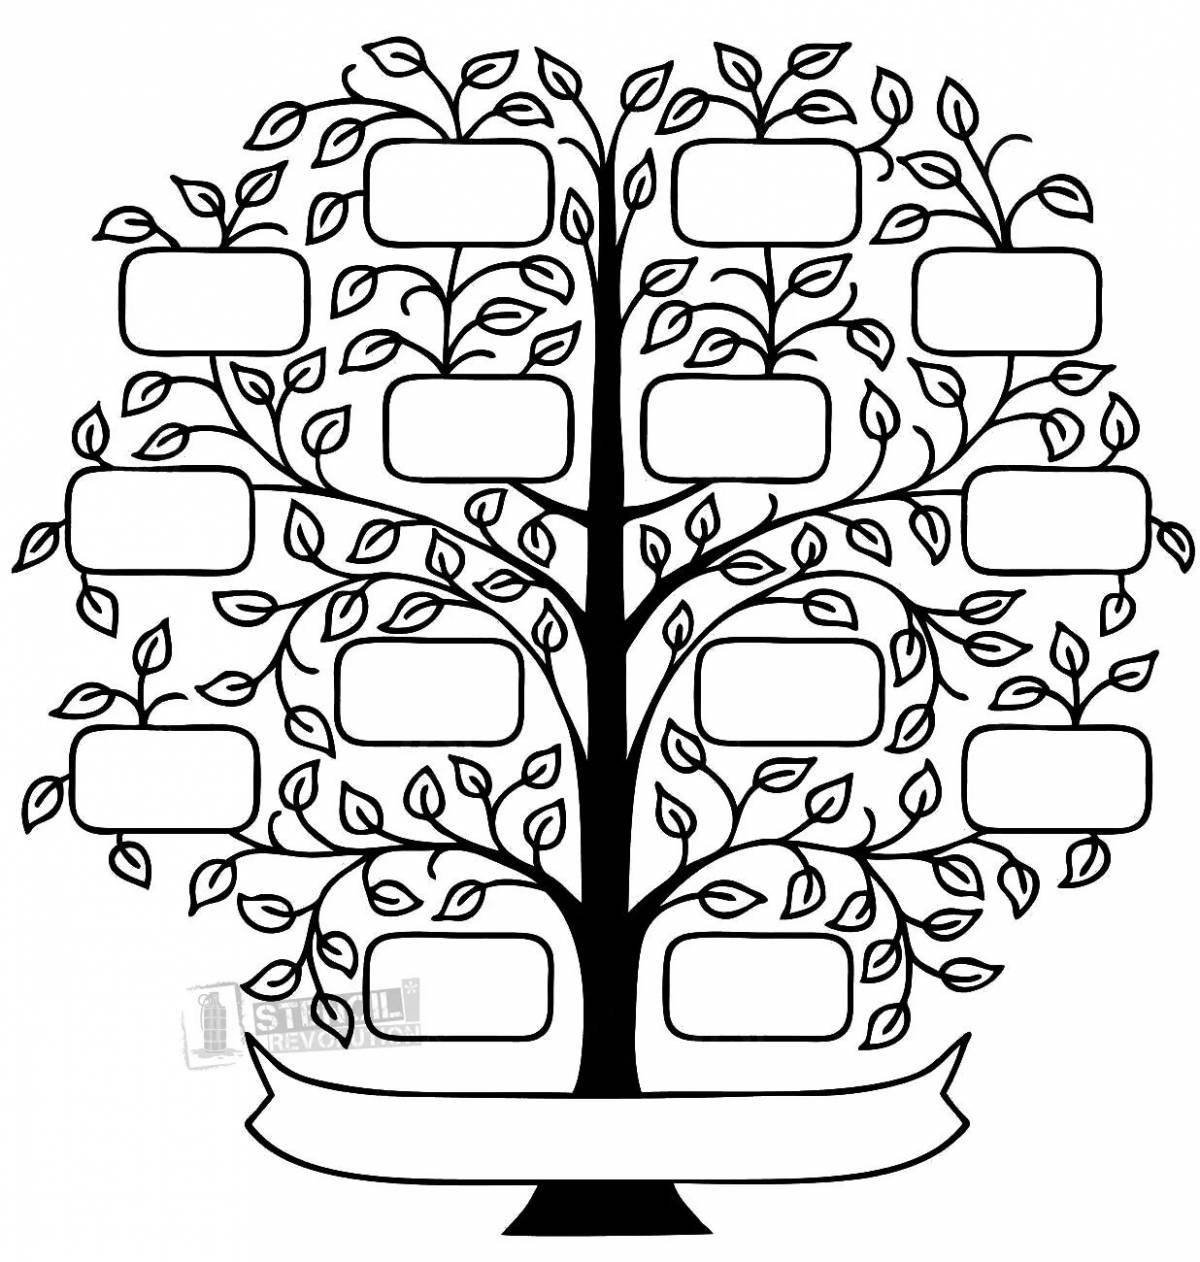 Family tree template for kids #5